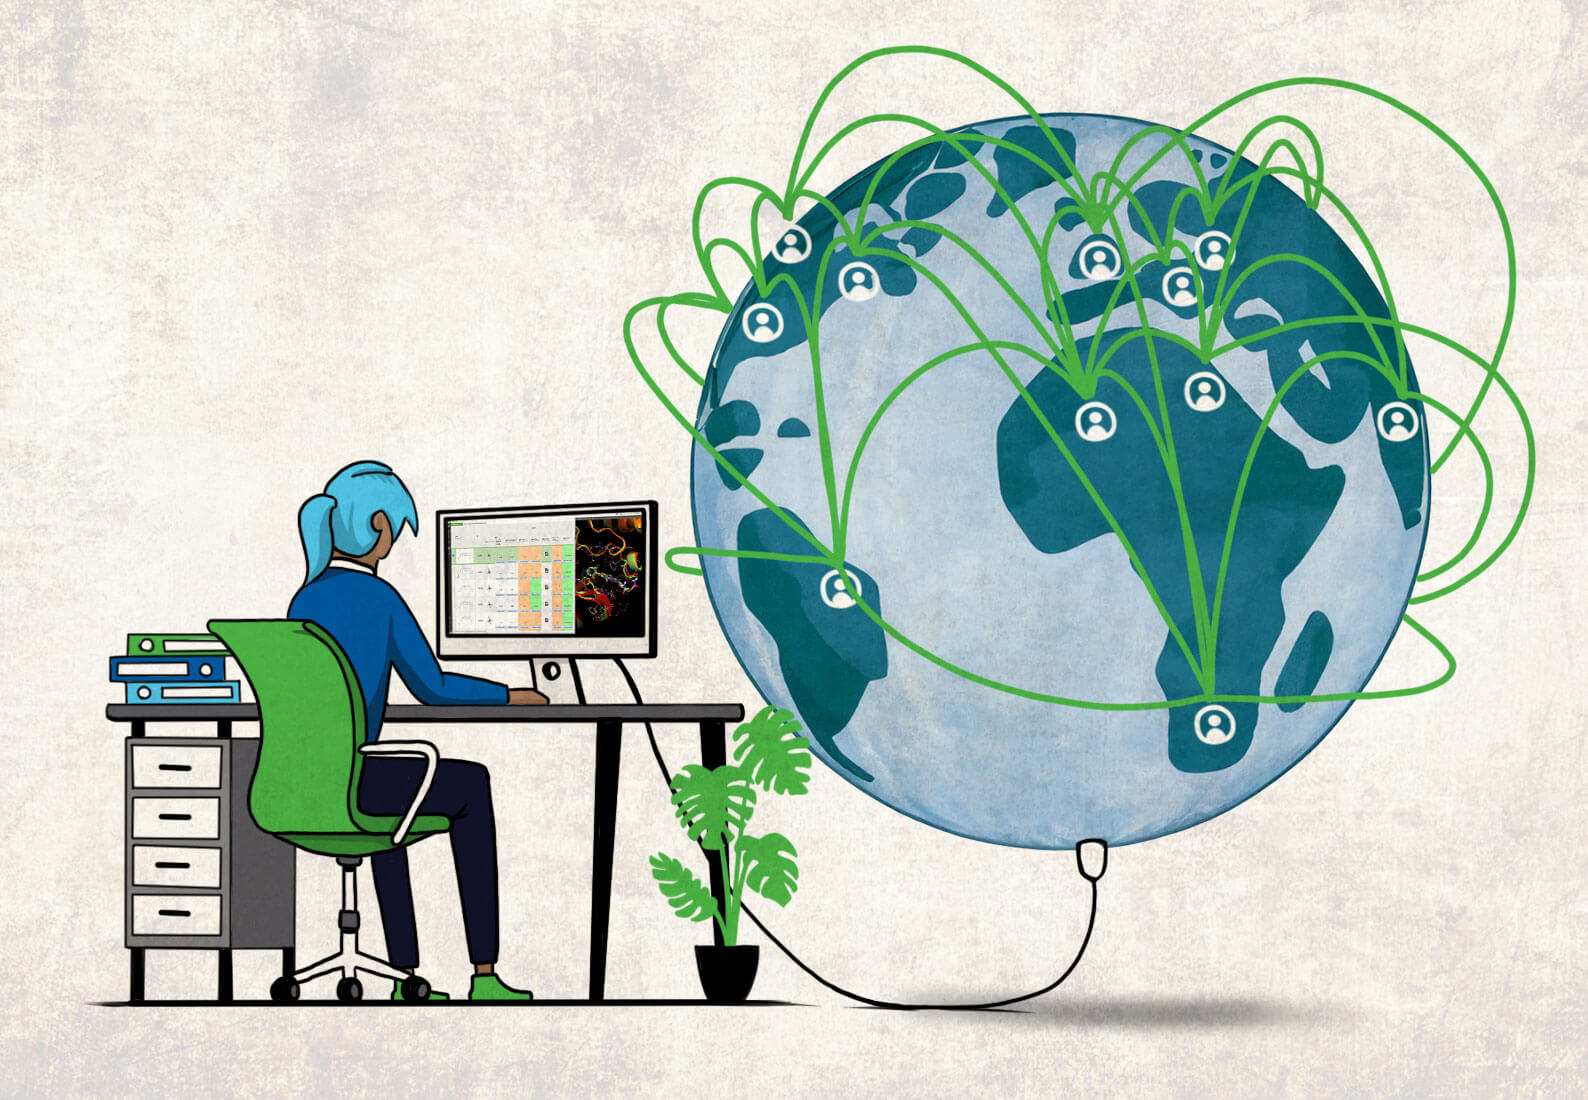 Person sitting at laptop with globe showing connections to other offices.